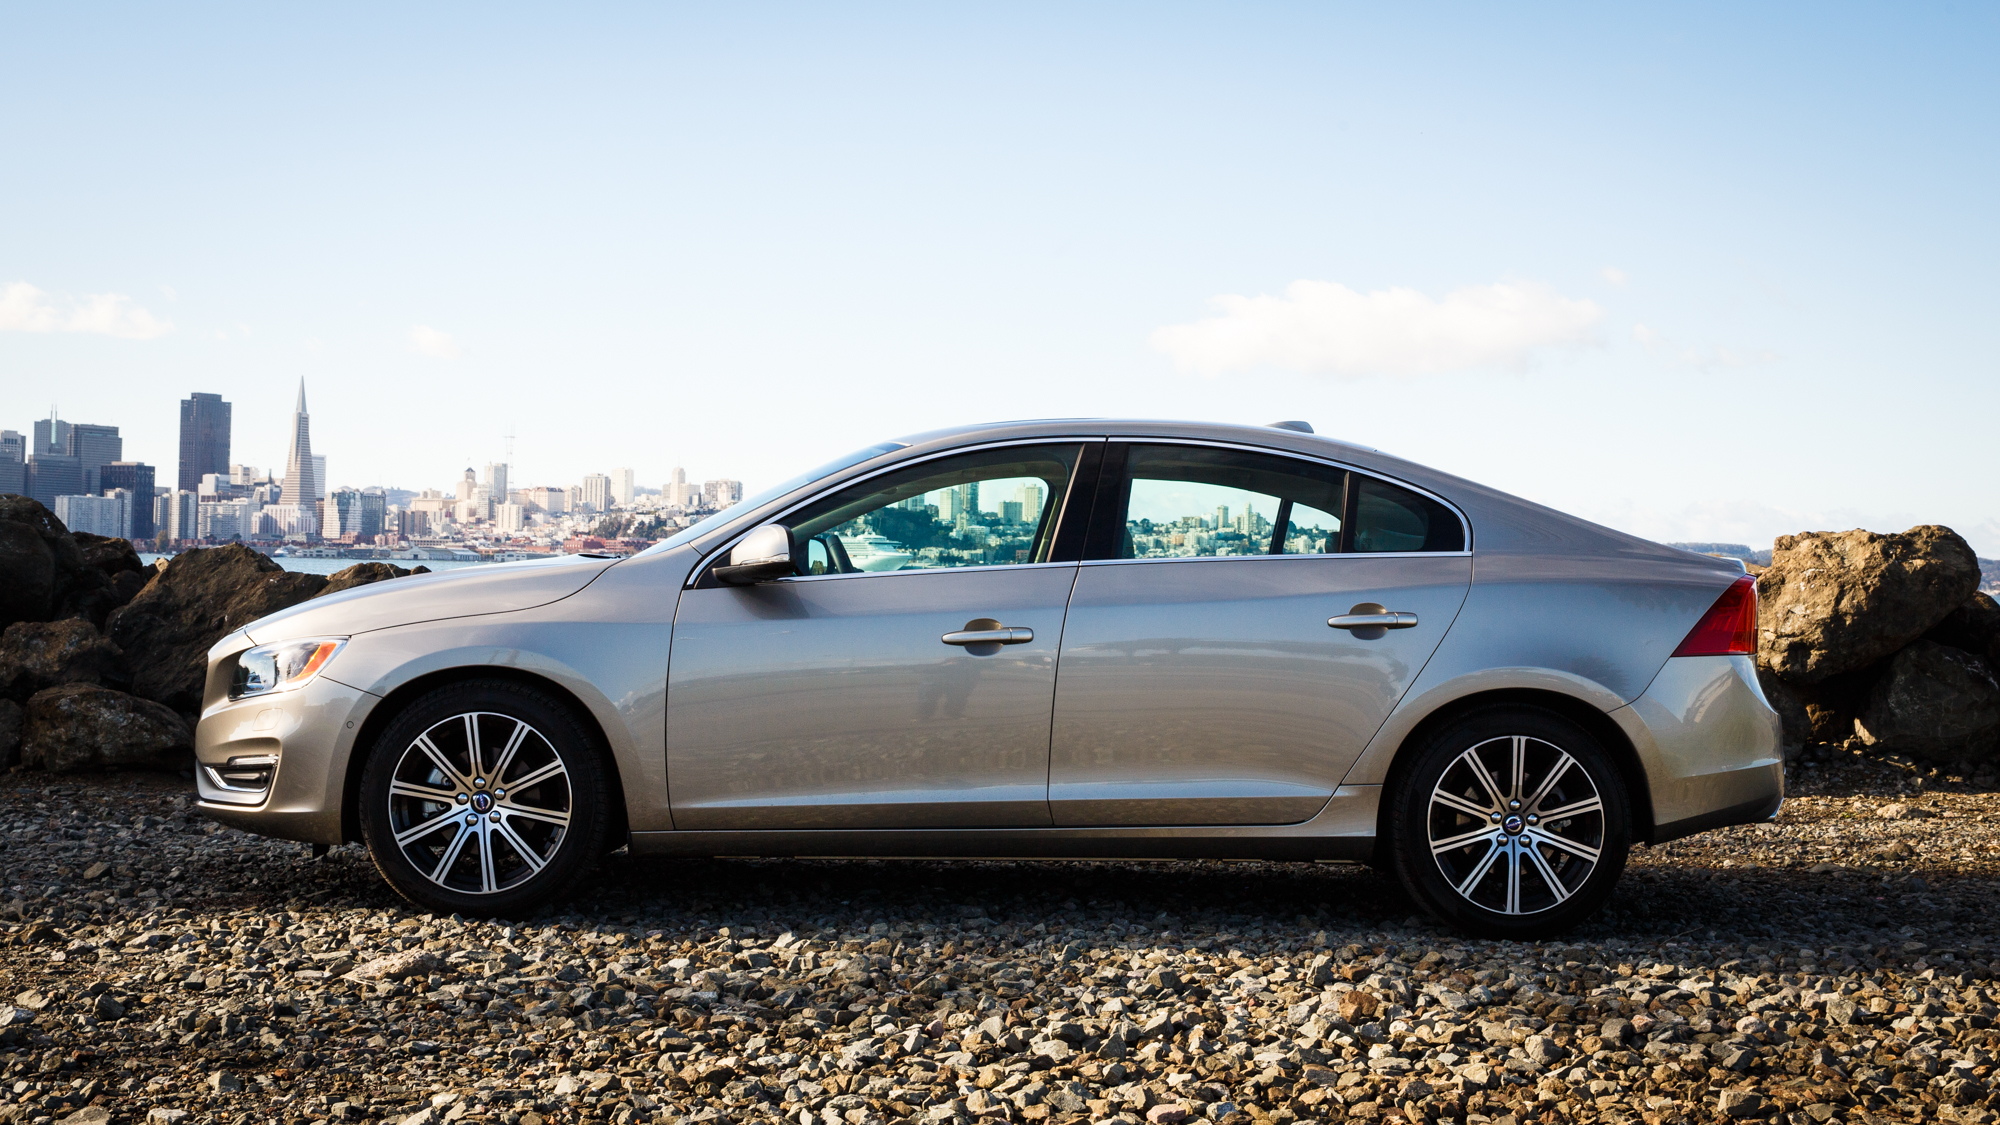 2016 Volvo S60 T5 Inscription review: Letting go of the wheel for  convenience, safety - CNET